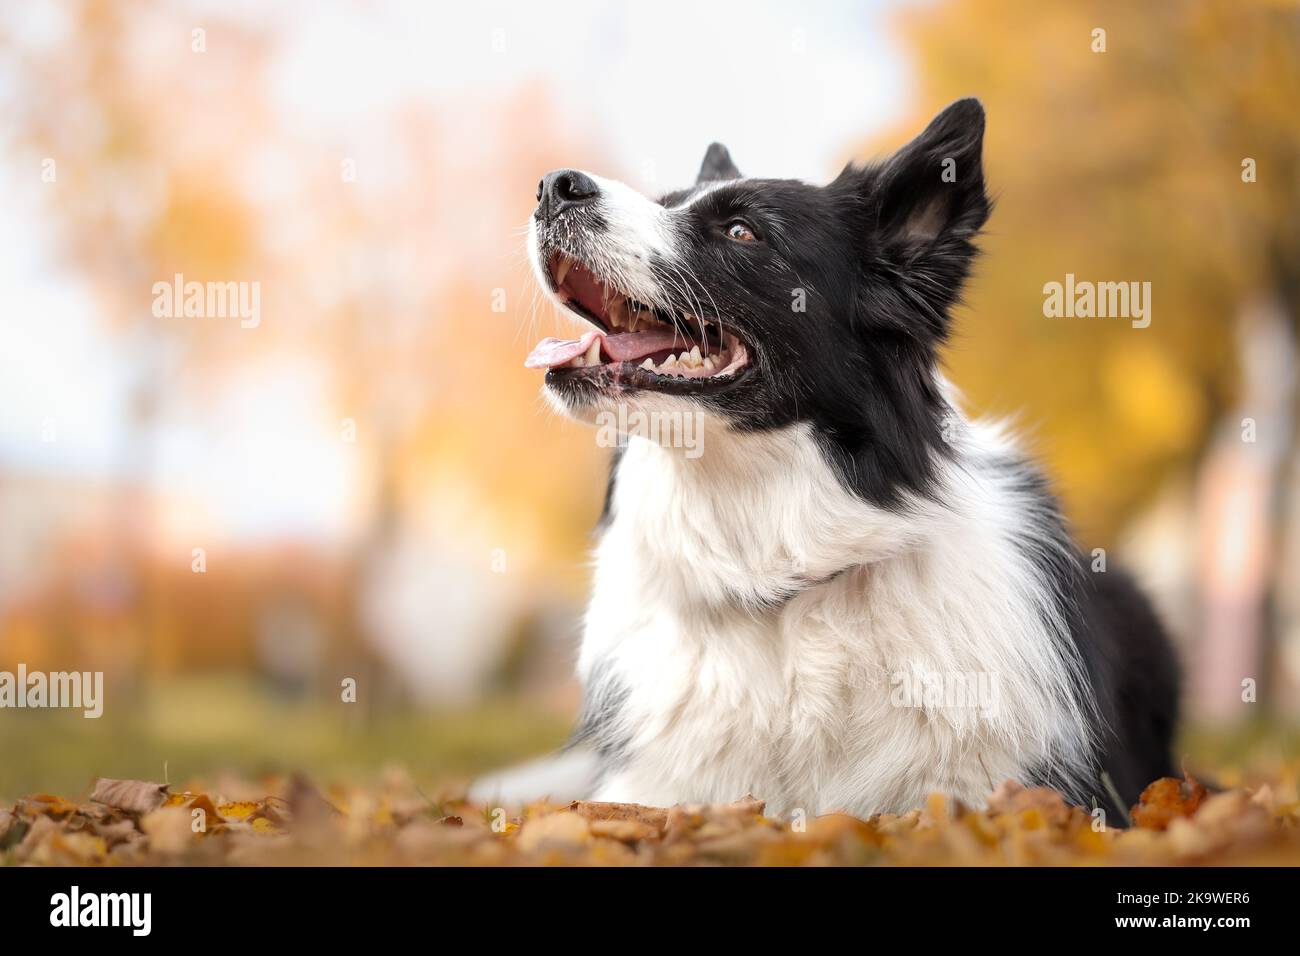 Happy Border Collie during Autumn Season. Smiling Black and White Dog Lies Down in October Park. Stock Photo